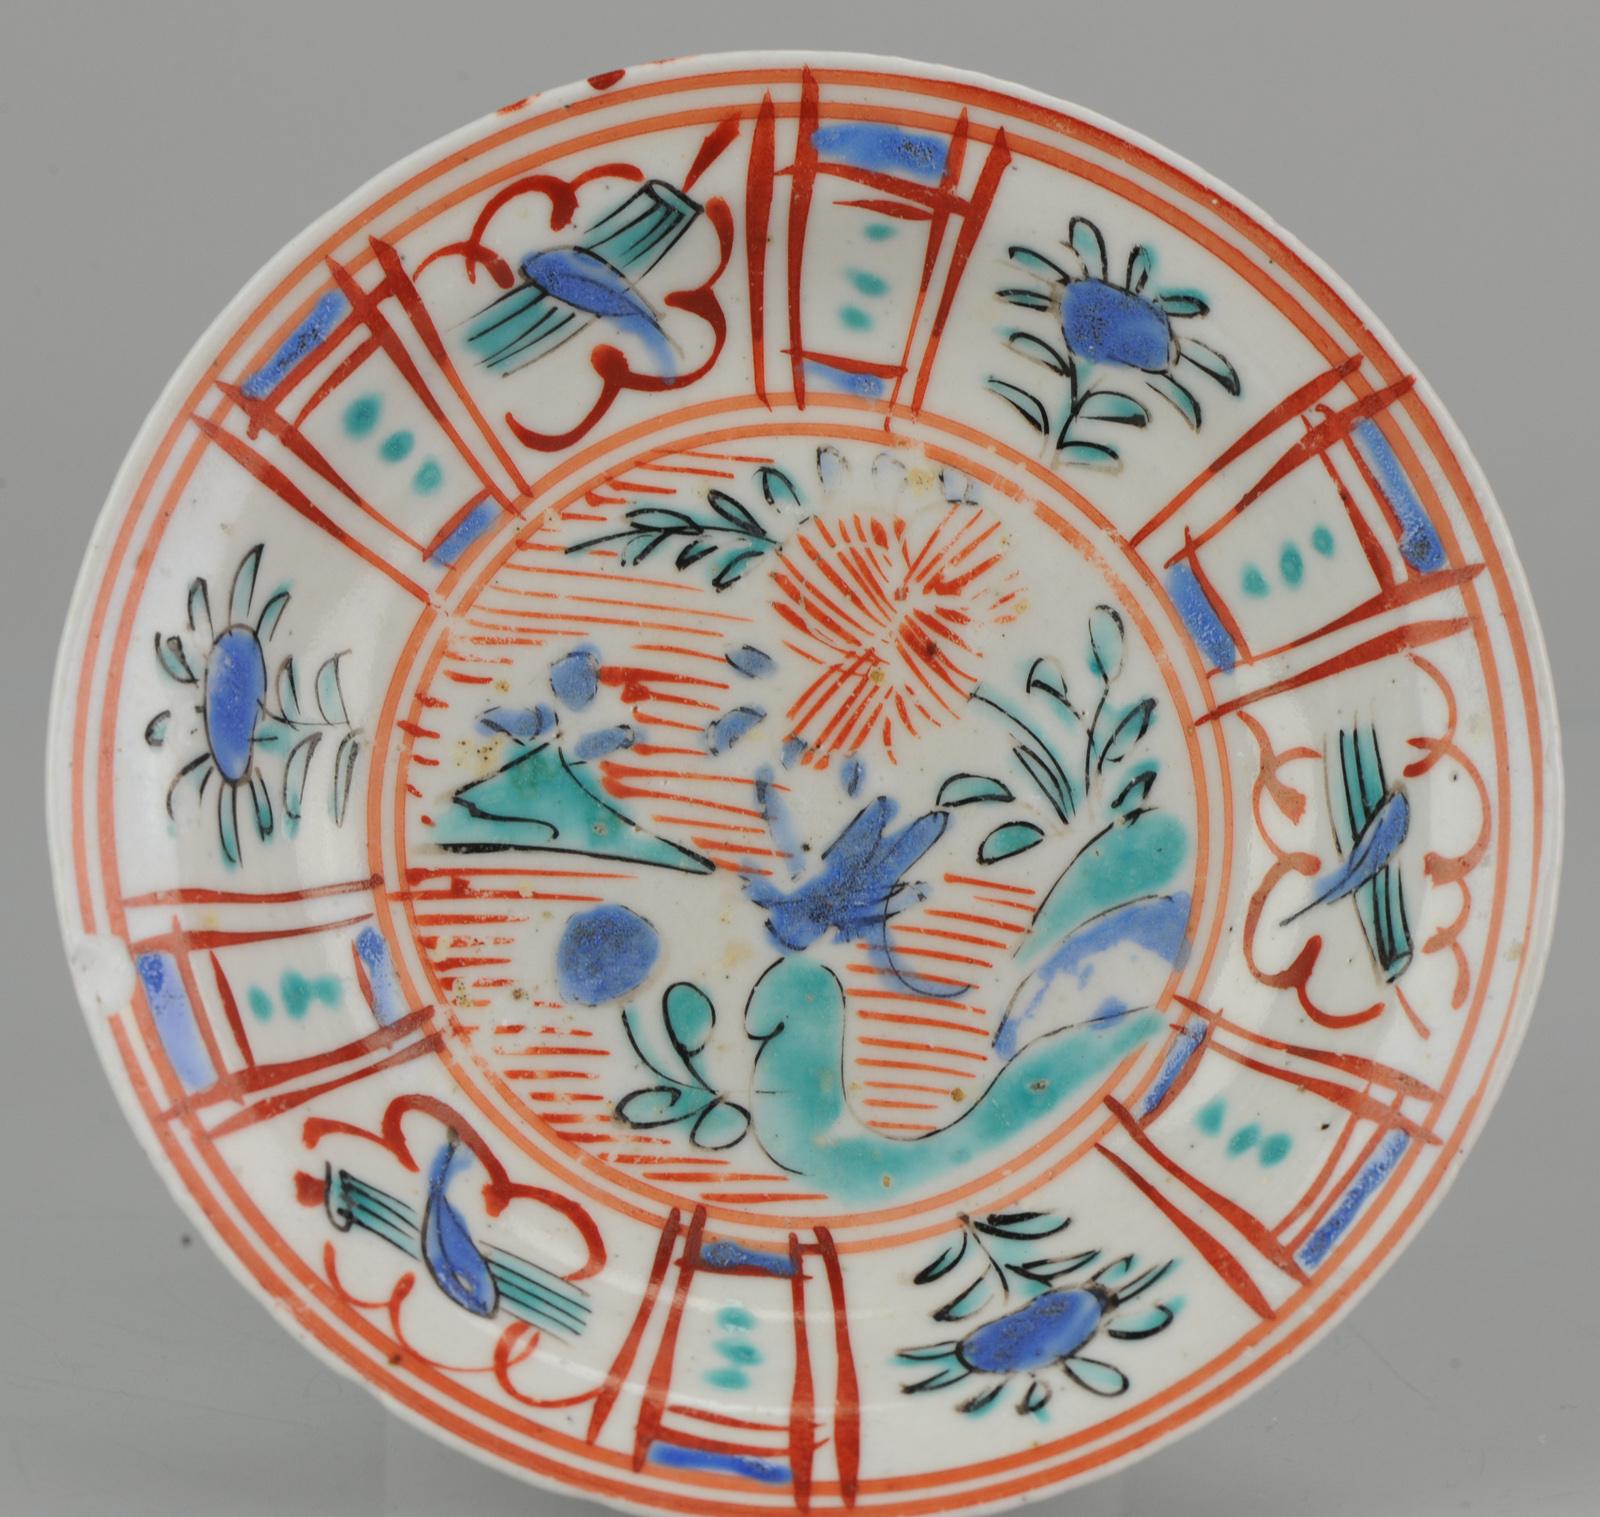 Sharing this lovely little dish from the second half of the 17th century.
It is painted in overglaze enamels in the style of a Chinese Kraak dish. With some imagination a grasshopper is visible in the centre on a rock. A mountain in green is also